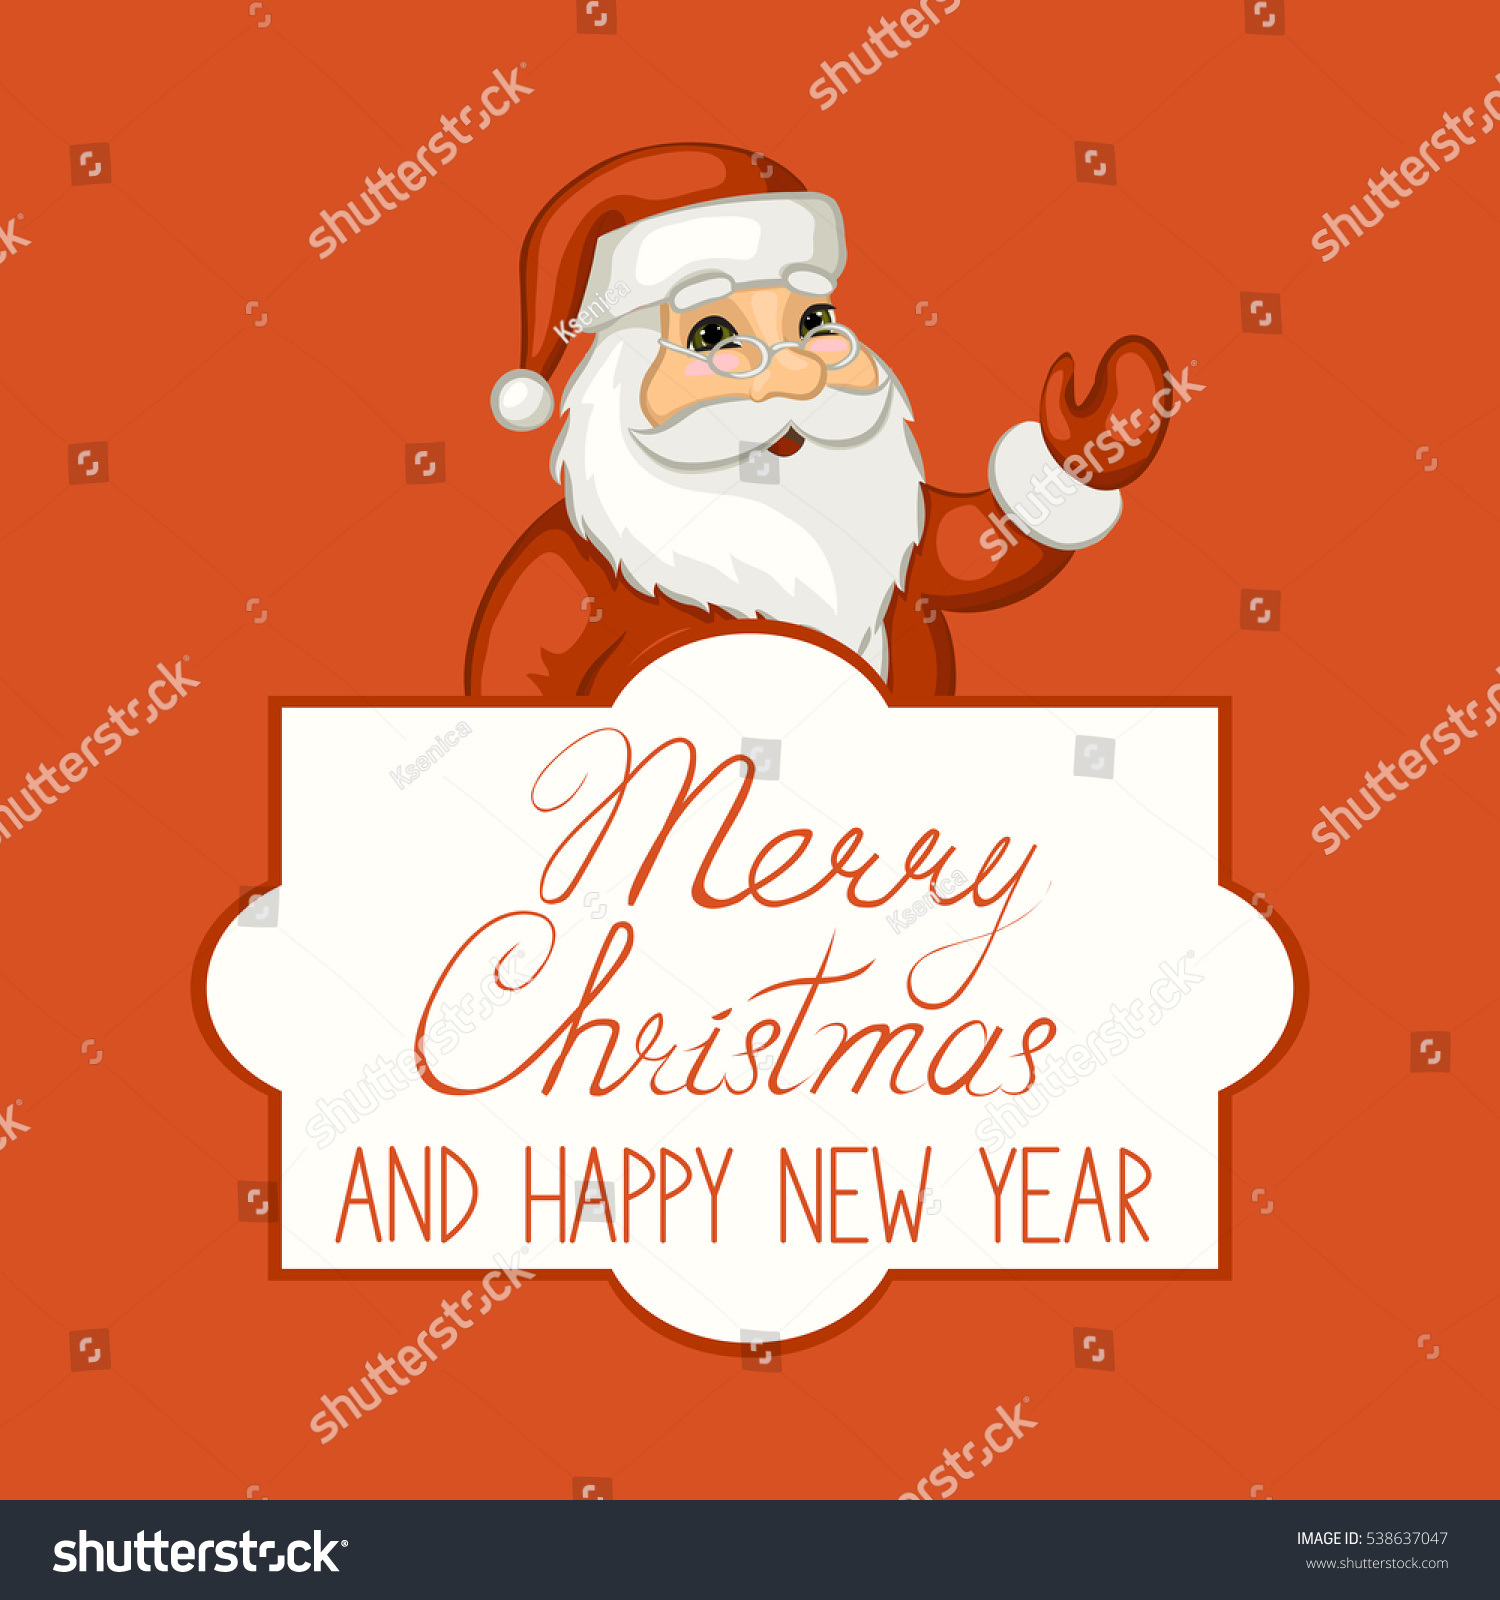 Merry Christmas and happy new year Greeting card with Santa Claus